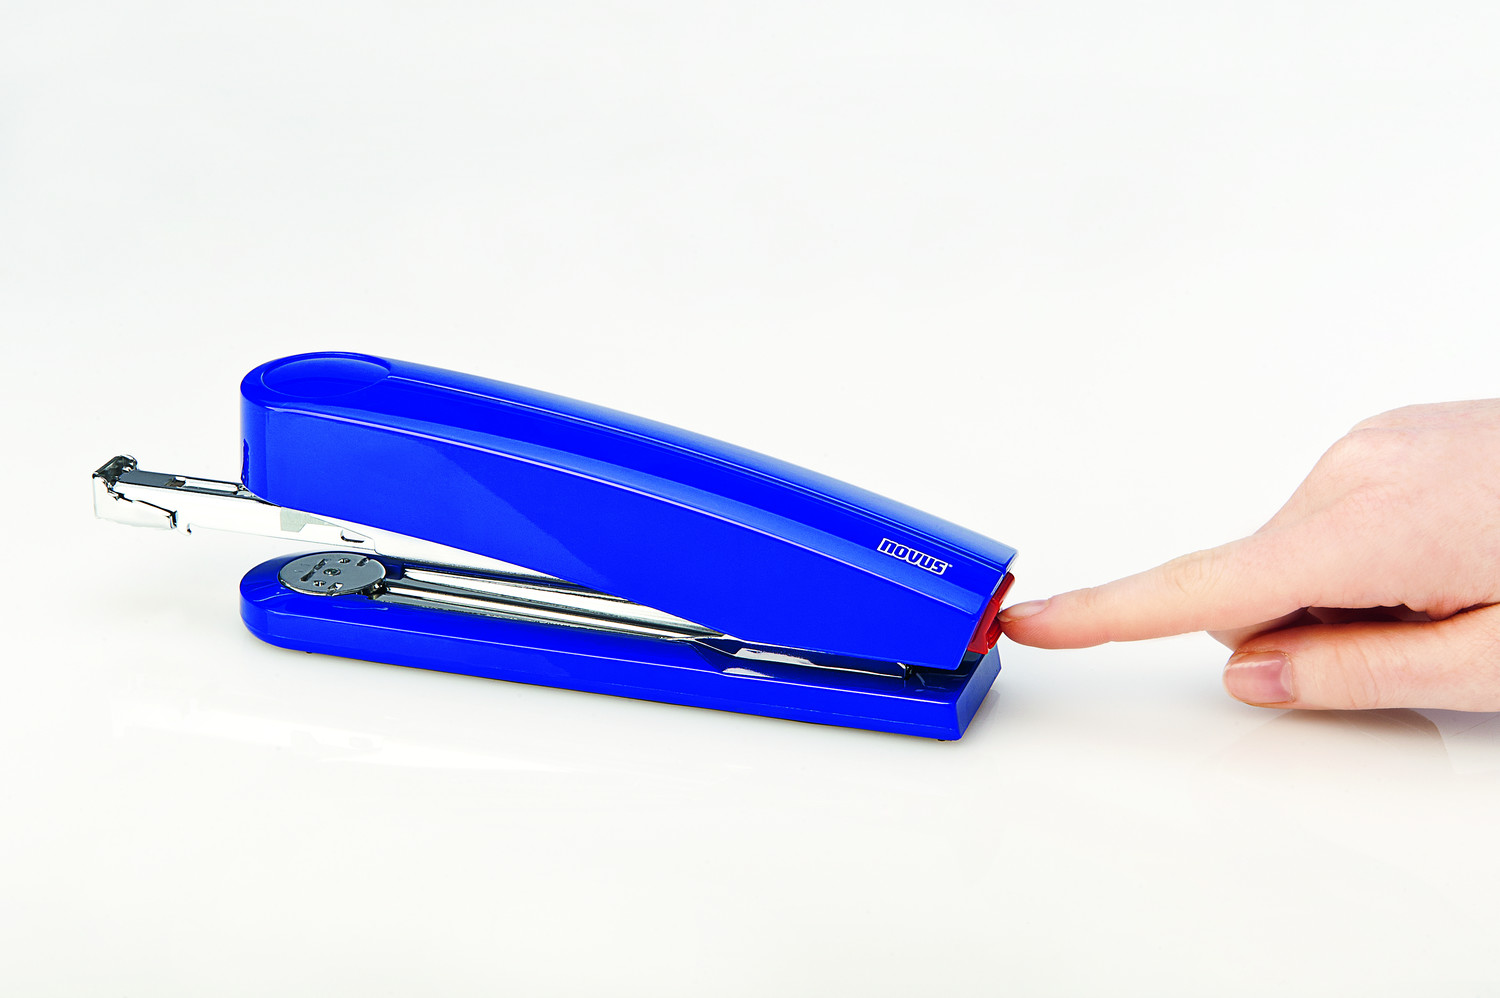 By pressing a button at the rear of the stapler, the staple magazine is released for front loading.